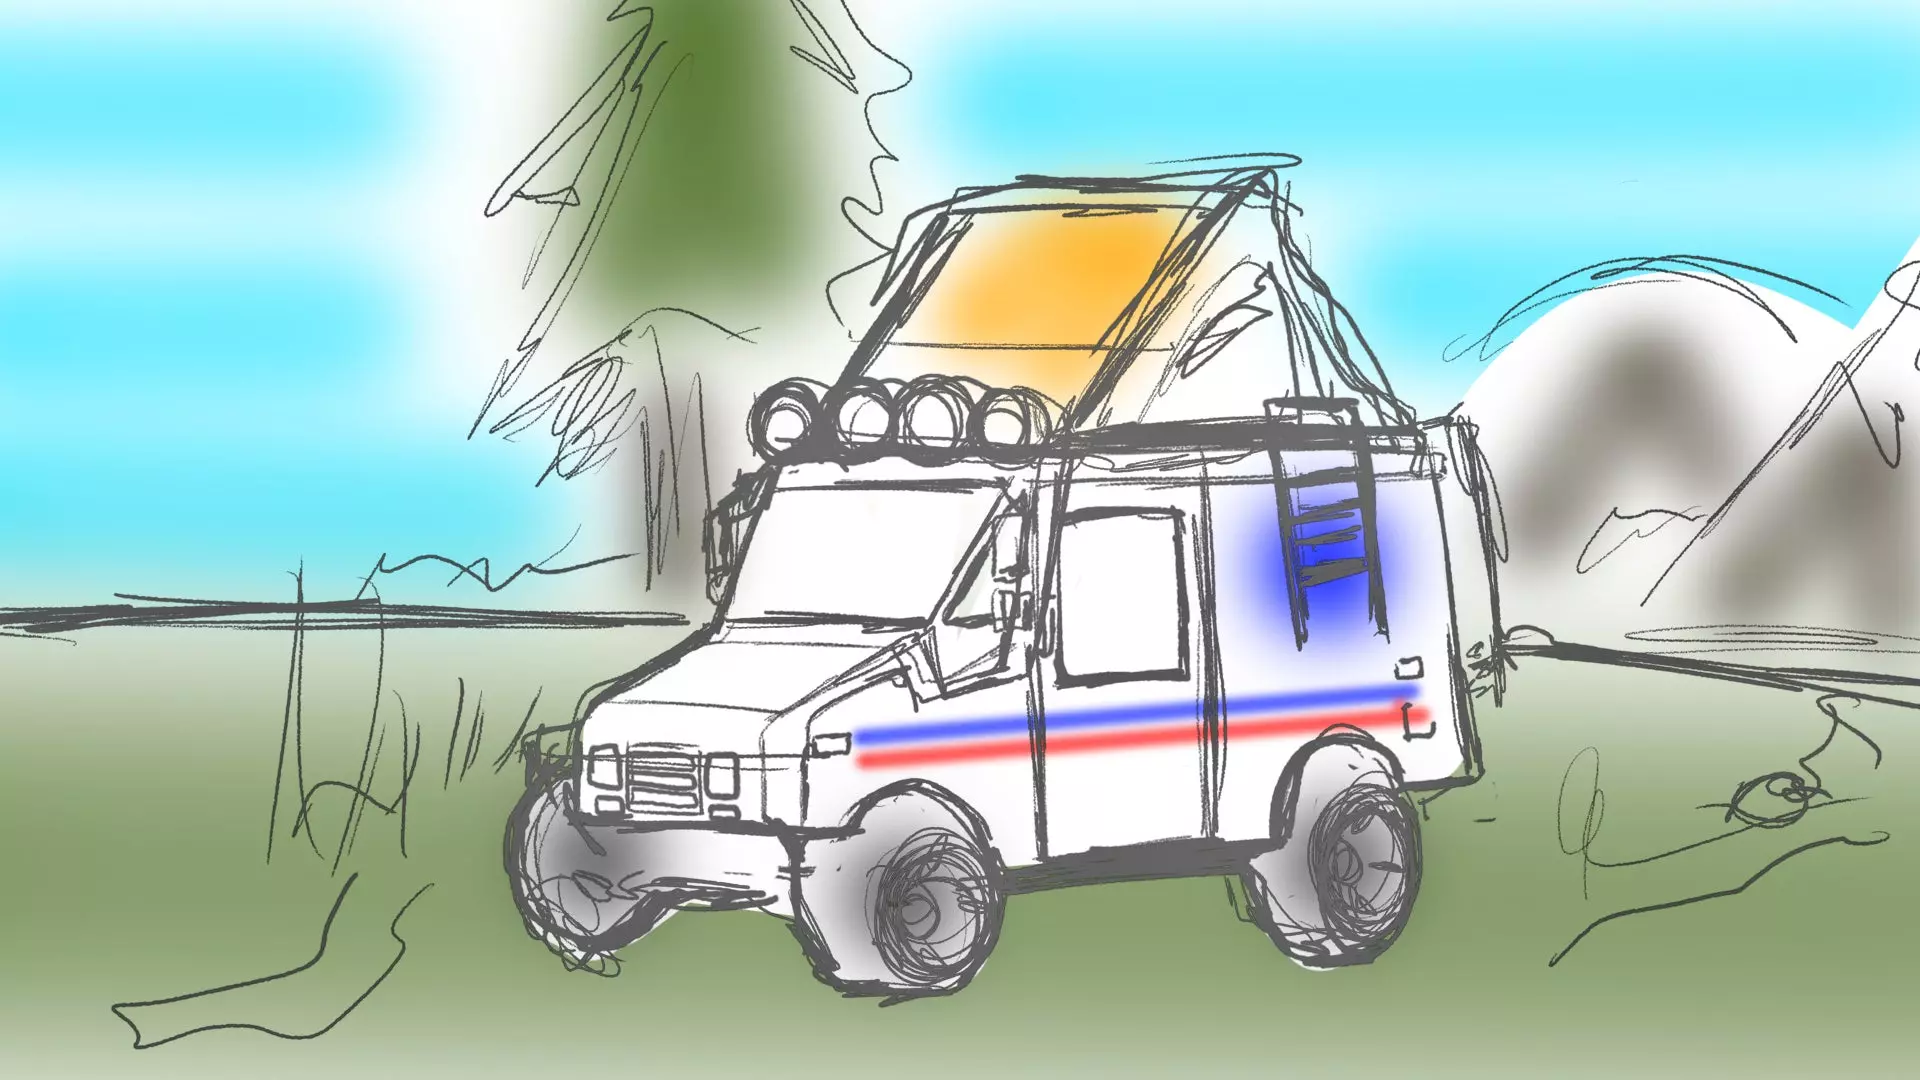 Reduce, Reuse, Recycle: Old Mail Trucks Should Be Converted, Not Crushed